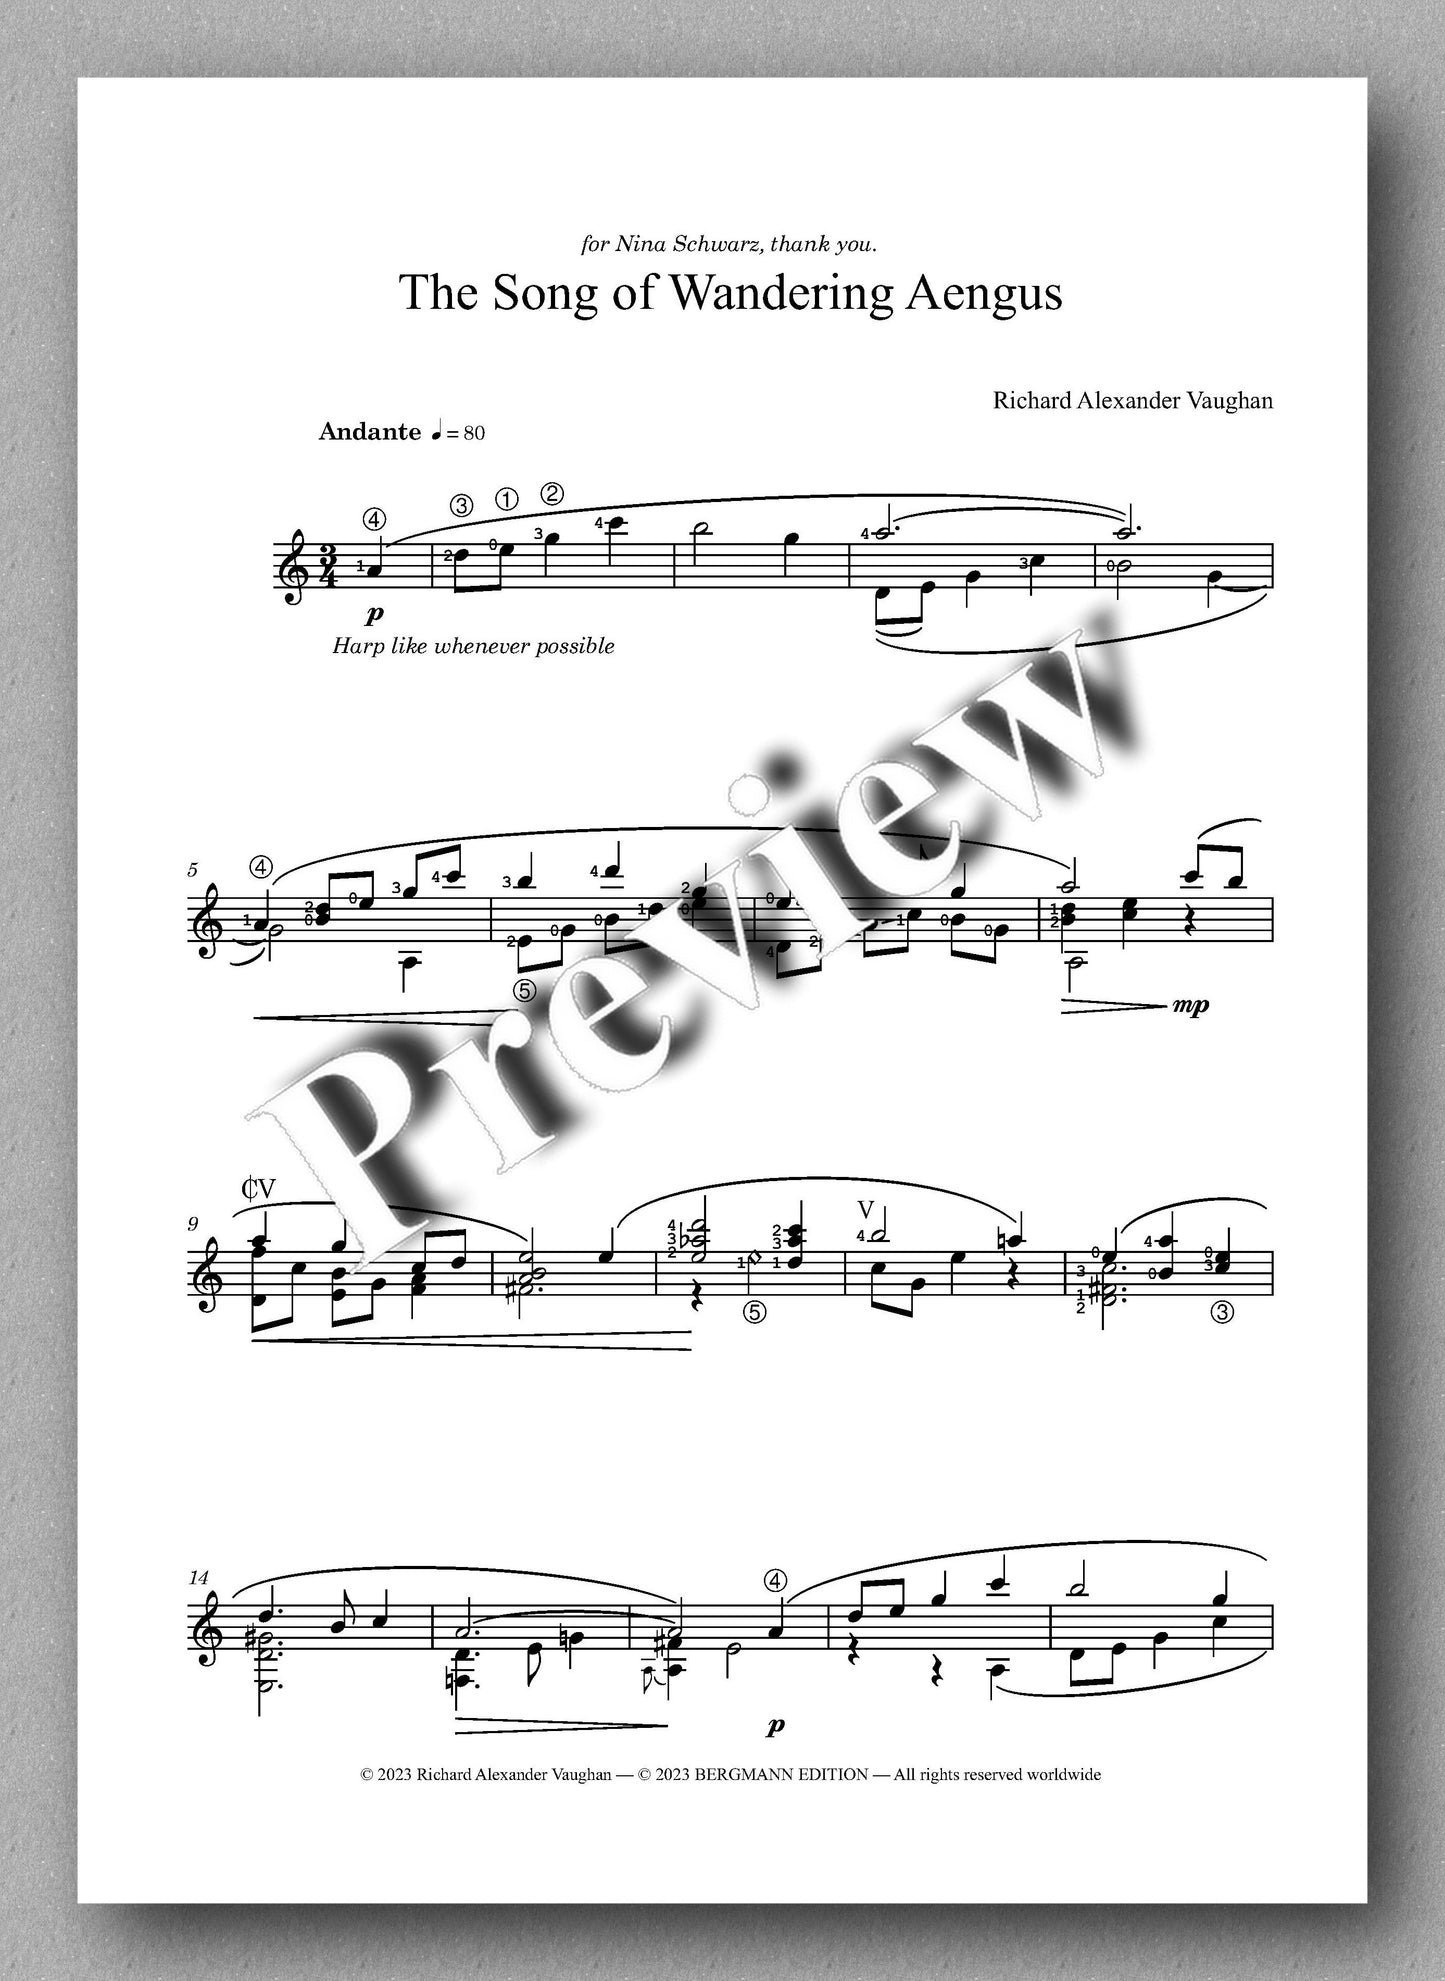 The Song of Wandering Aengus by Richard Vaughan - preview of the music score 1